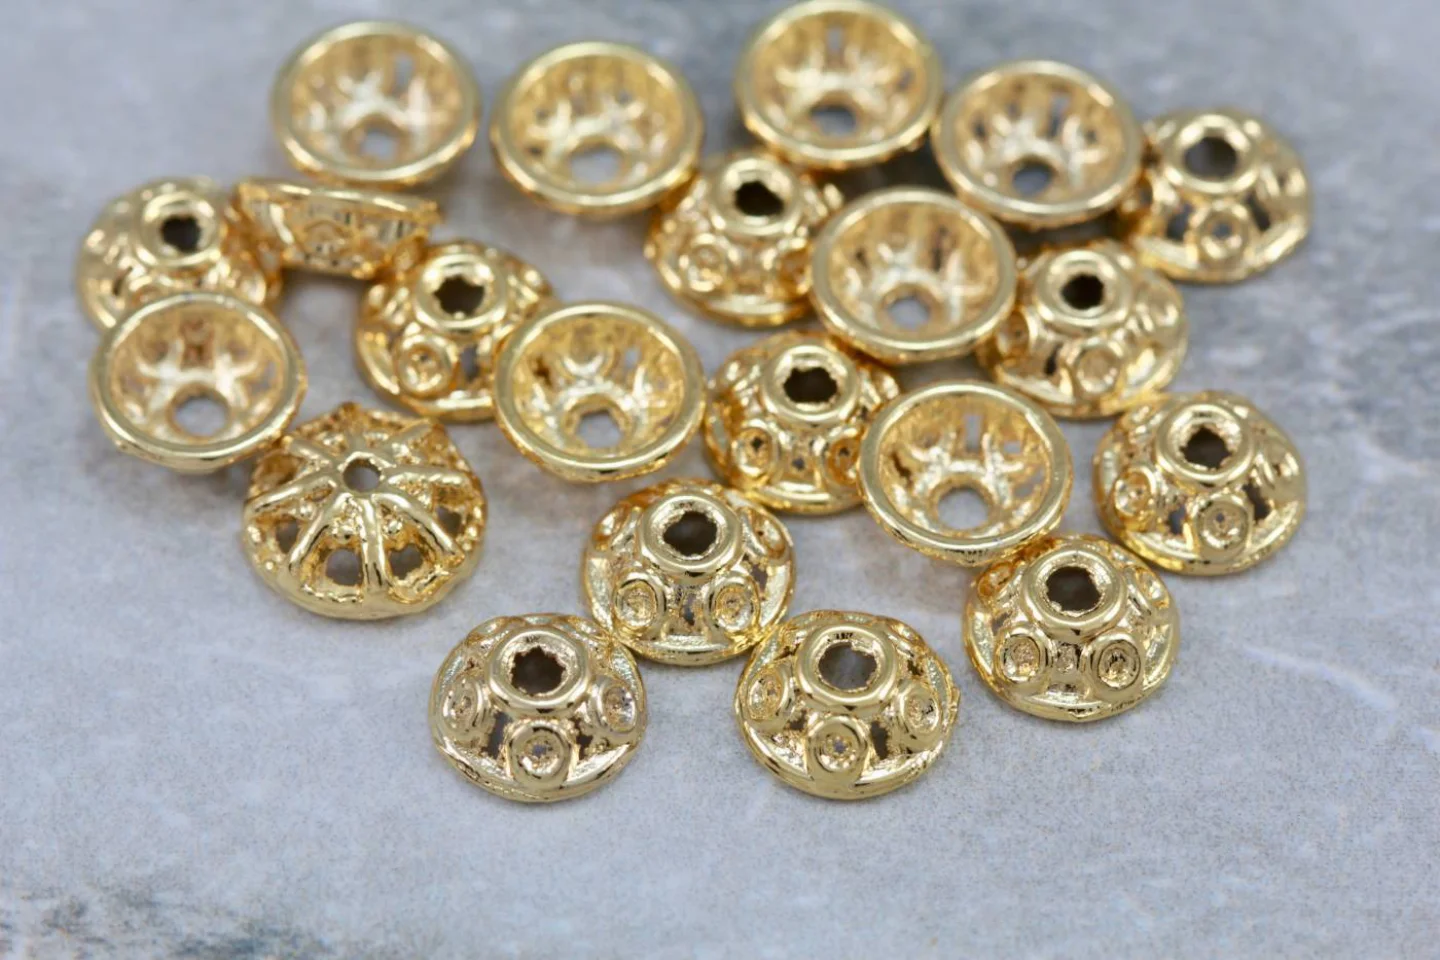 small-gold-metal-jewelry-bead-end-caps.